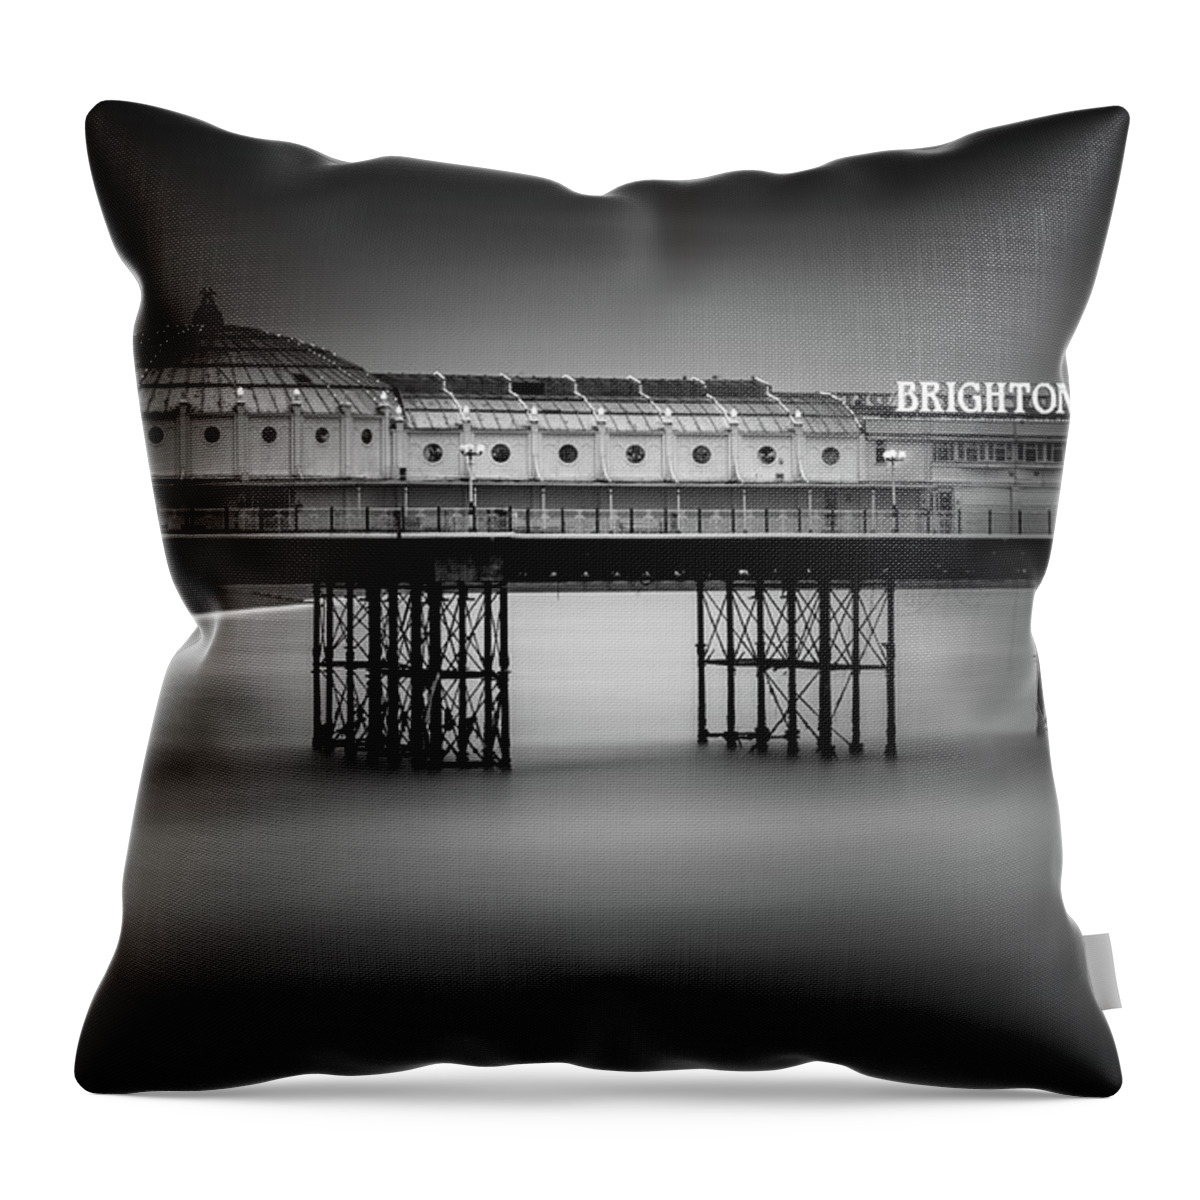 Brighton Pier Throw Pillow featuring the photograph Brighton Pier, England by Ivo Kerssemakers